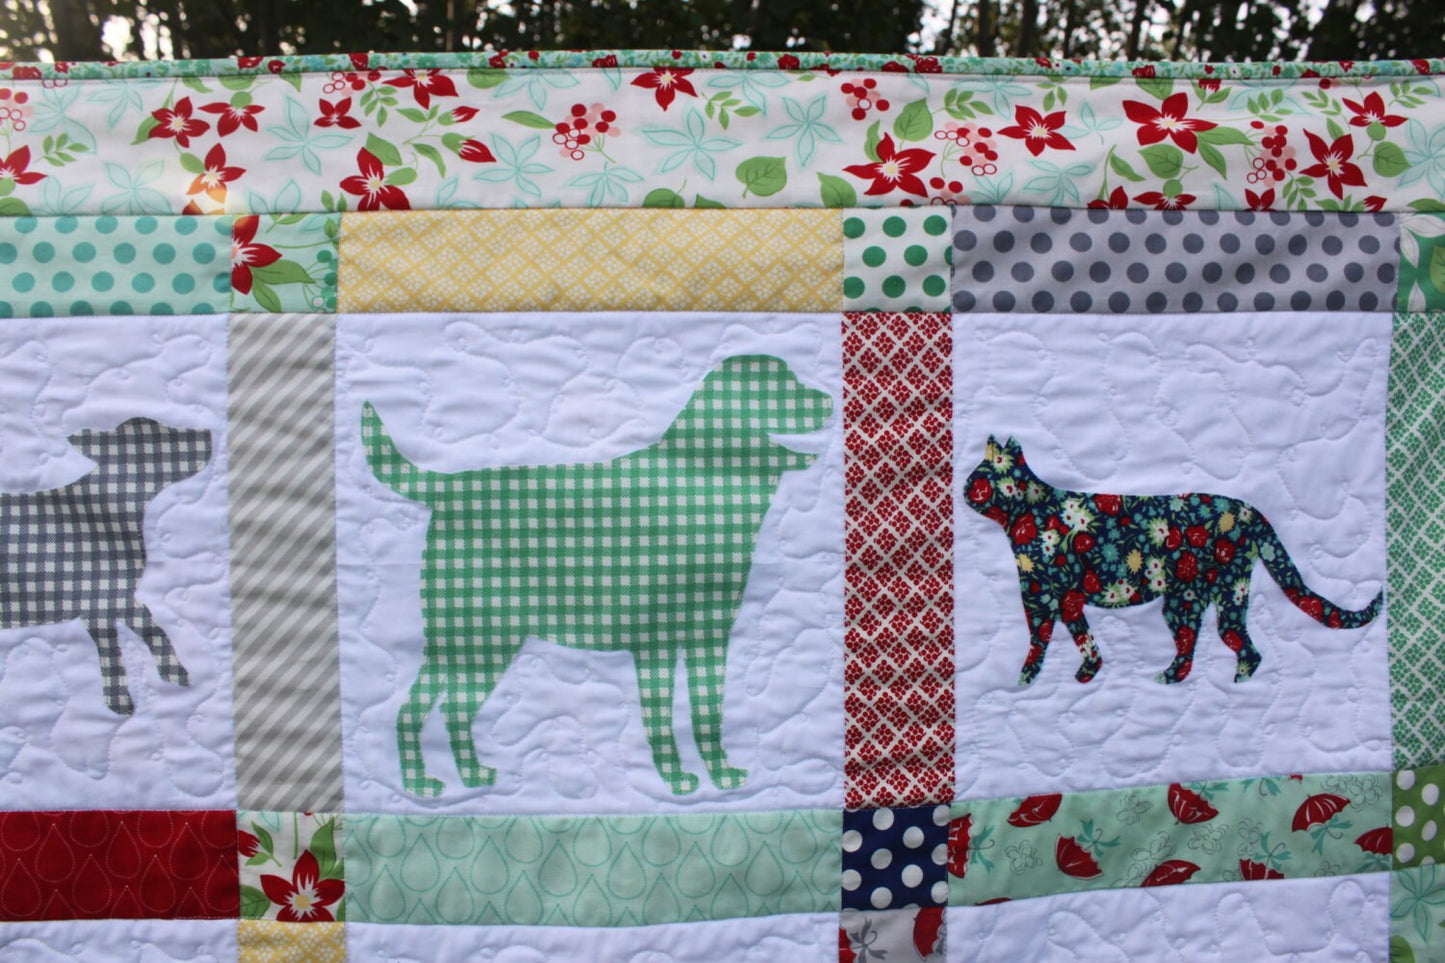 Gingham Dog and Calico Cat PDF Quilt Pattern Dog and Cat silhouette applique Crib or Toddler Bed Quilt